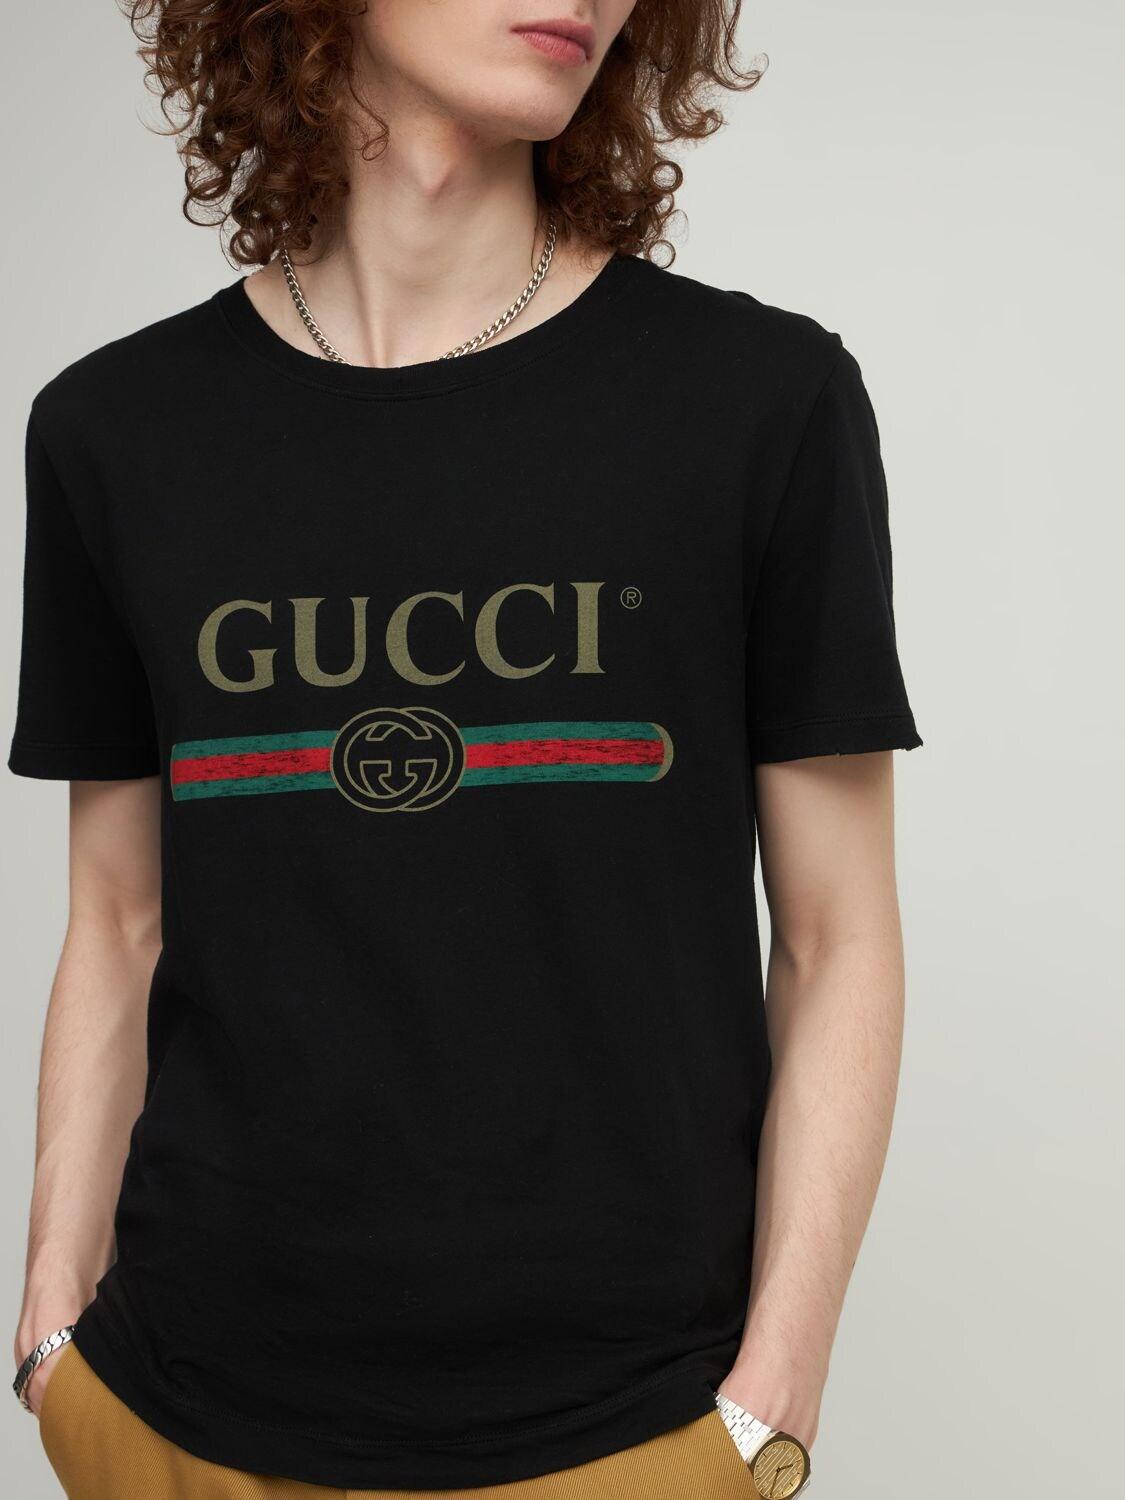 Gucci Cotton Distressed Fake Logo T Shirt in Black for Men - Save 41% | Lyst